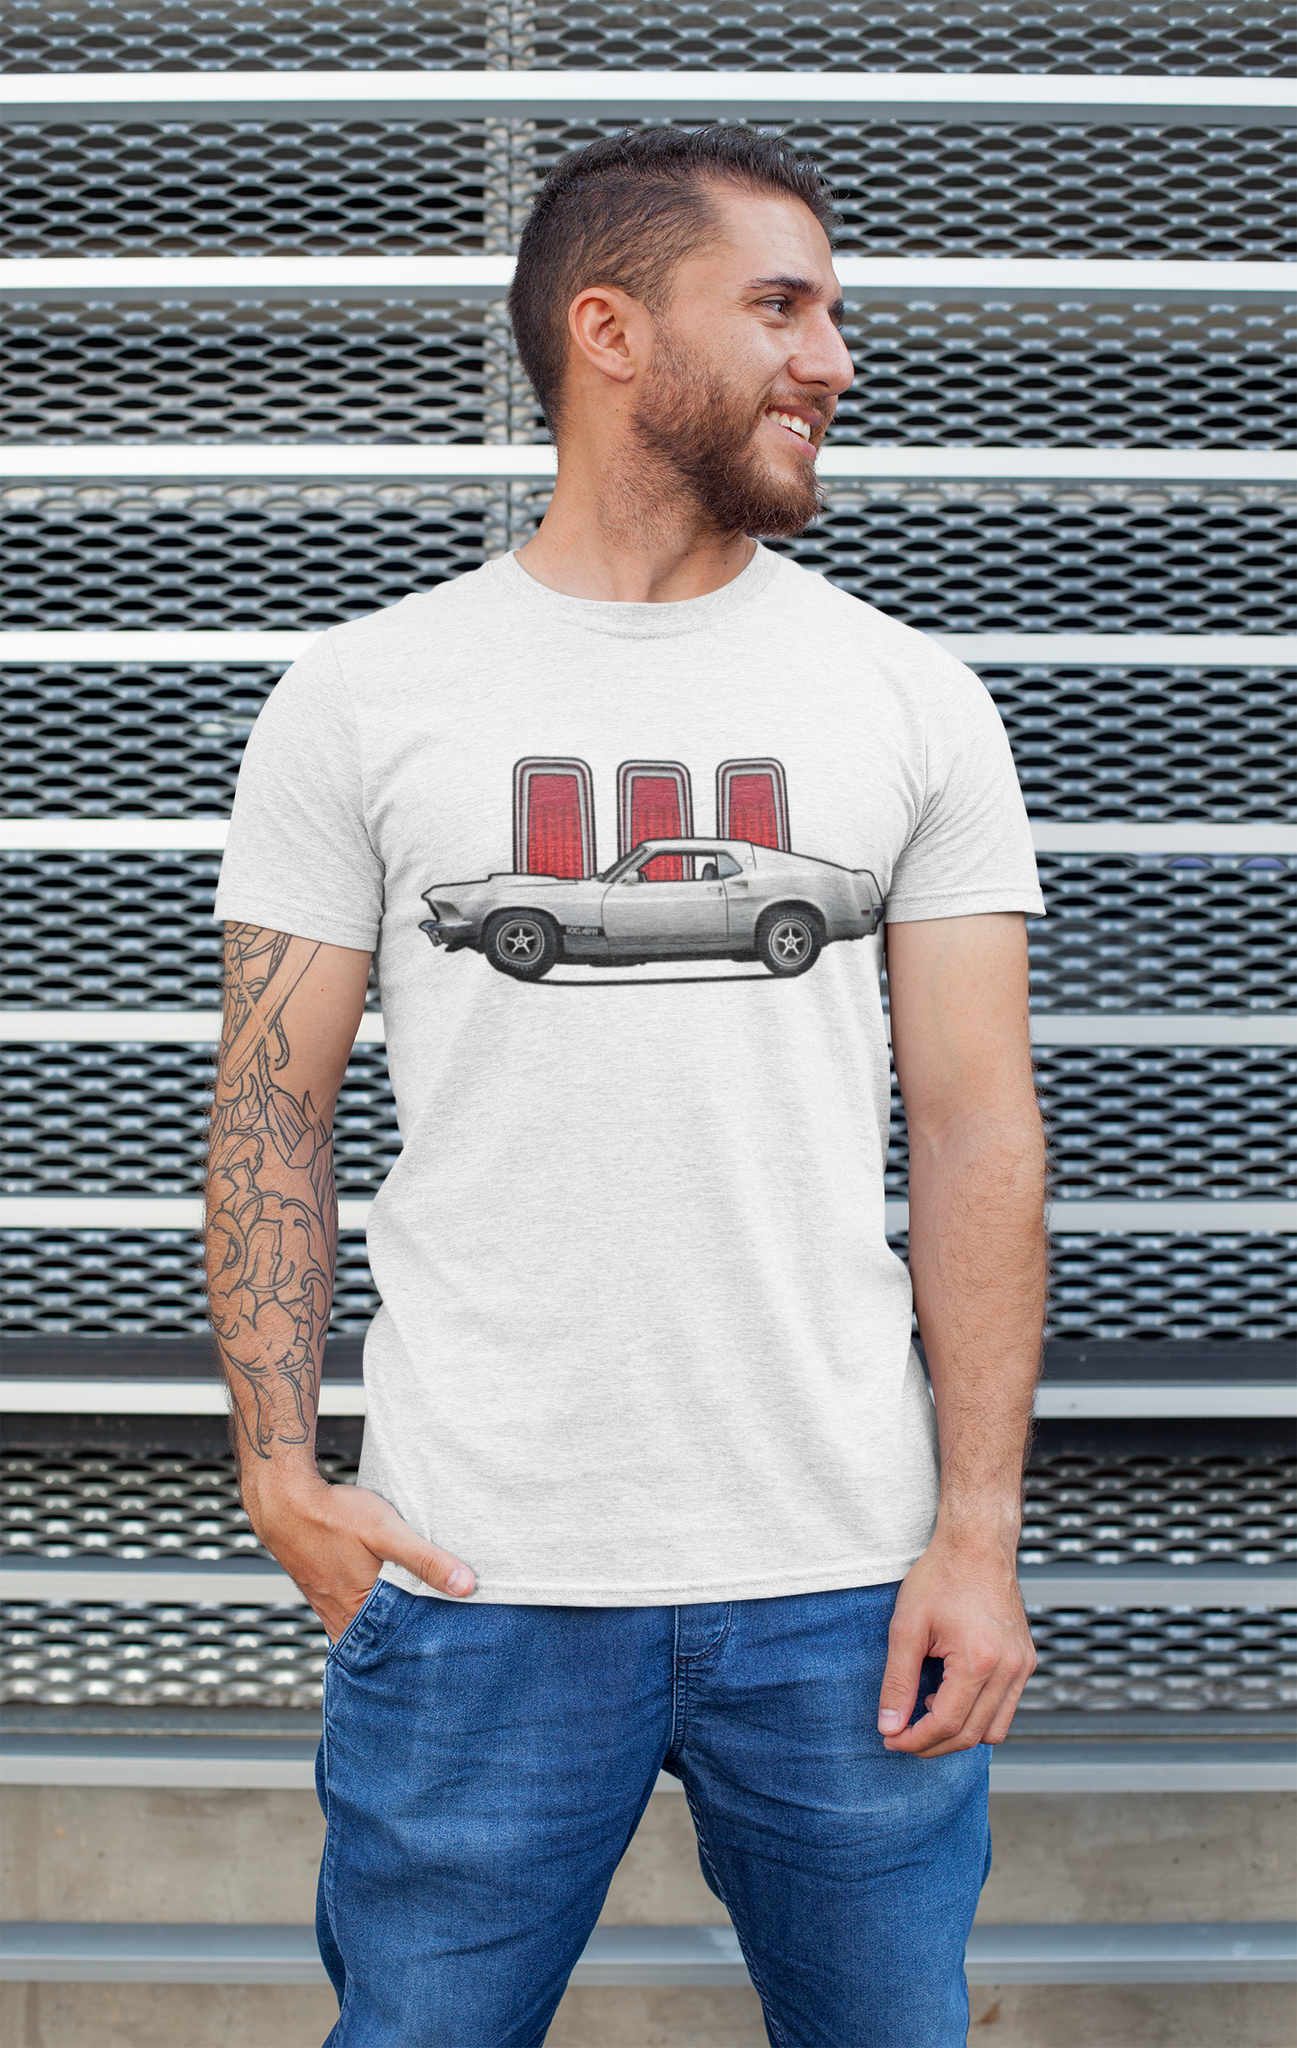 A man wearing a white Ford Mustang tee shirt by a wall.